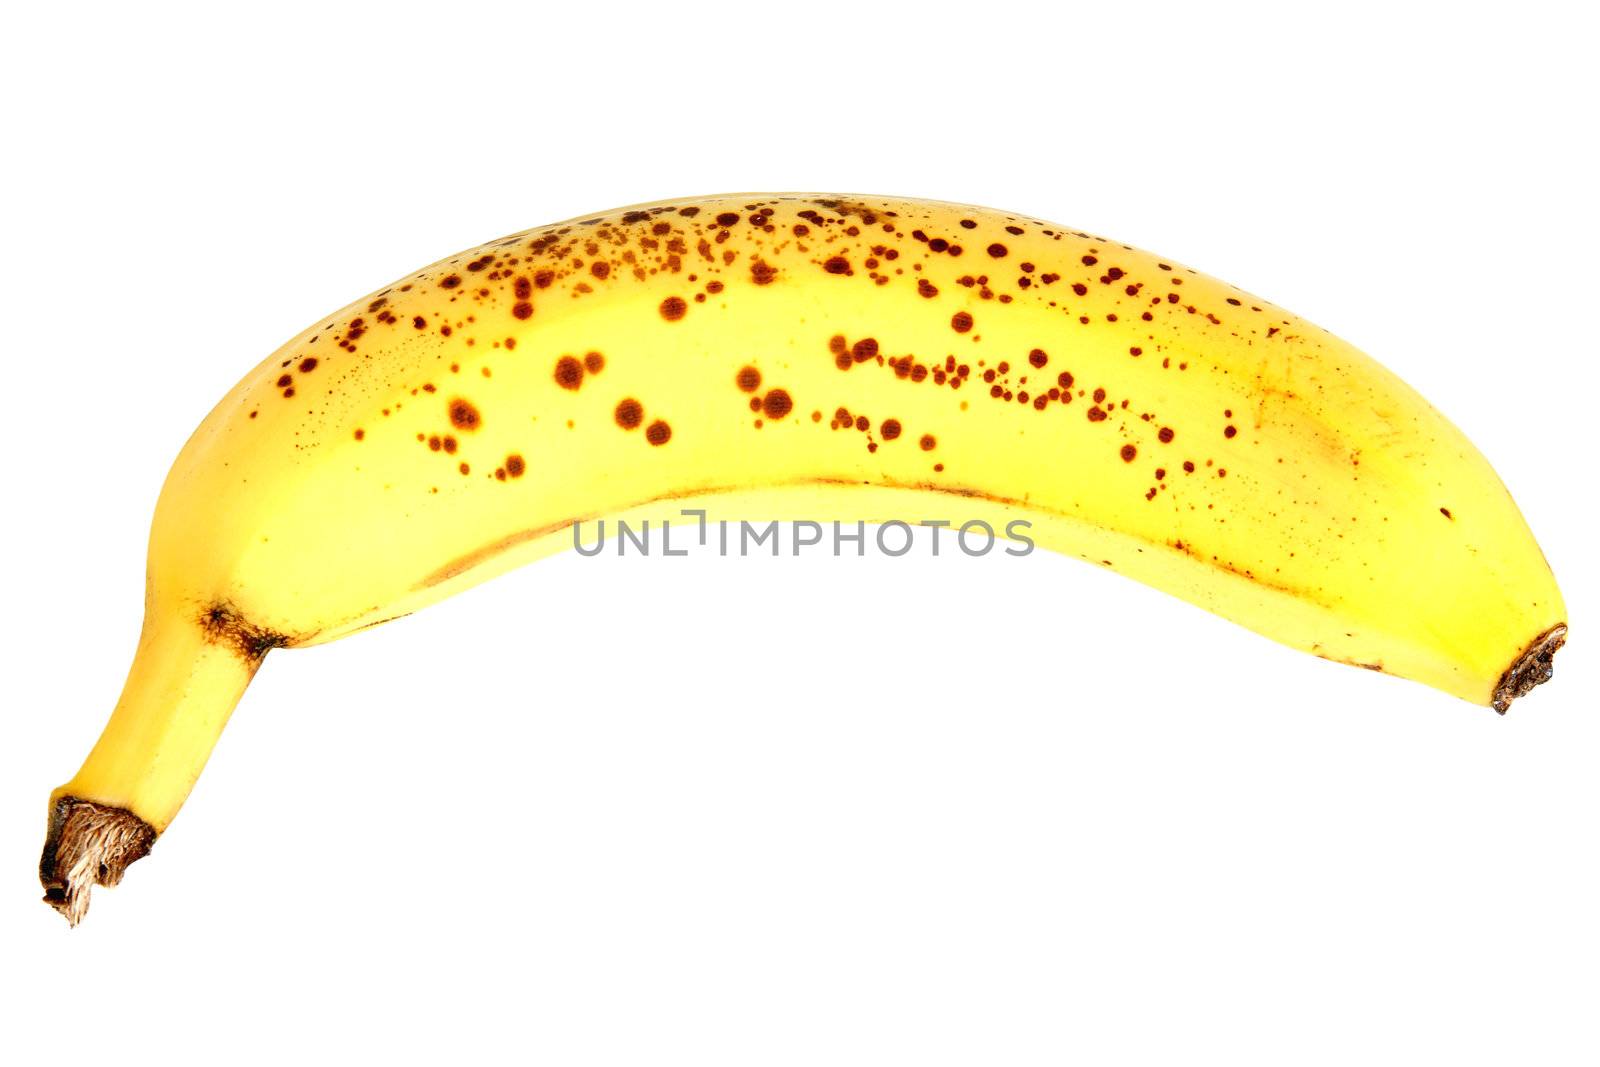 Single big banana isolated on white background (with clipping path)